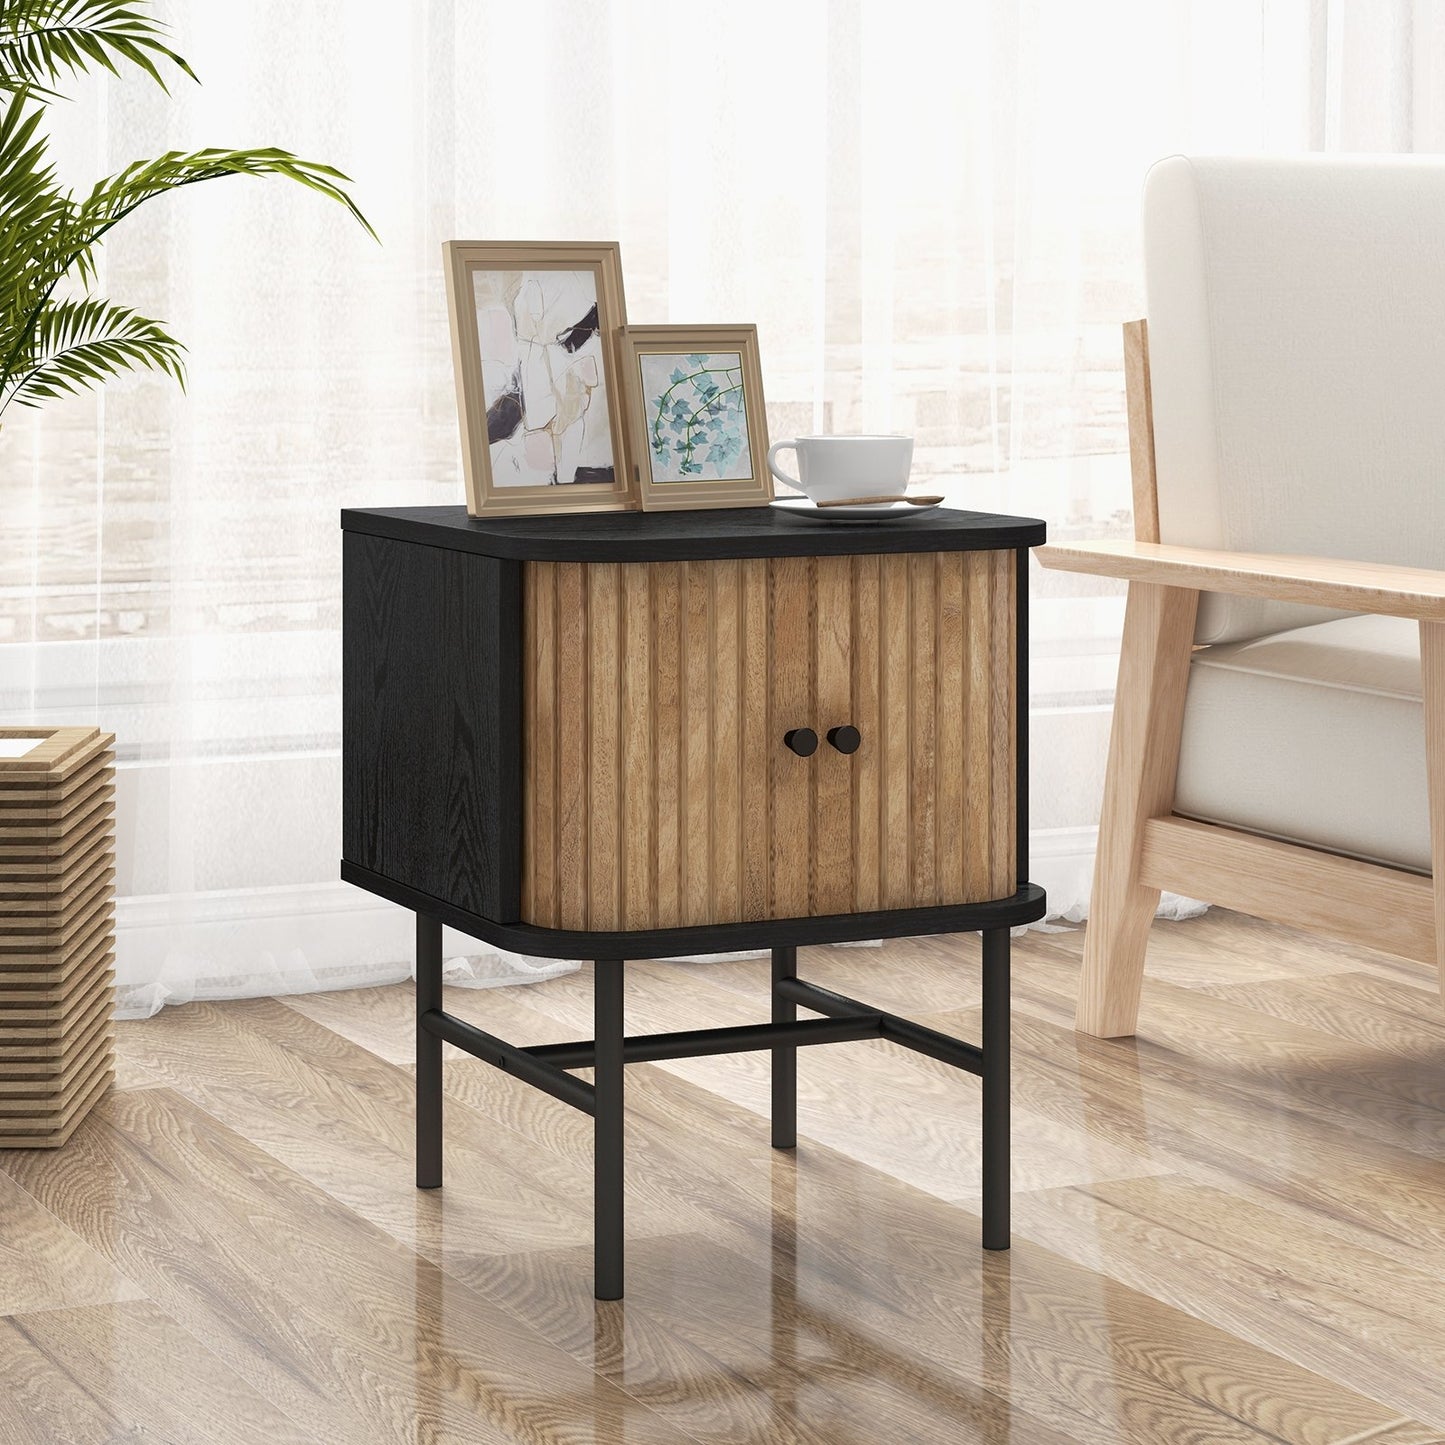 Mid-century Modern Nightstand with Sliding Doors and Storage Cabinet, Black